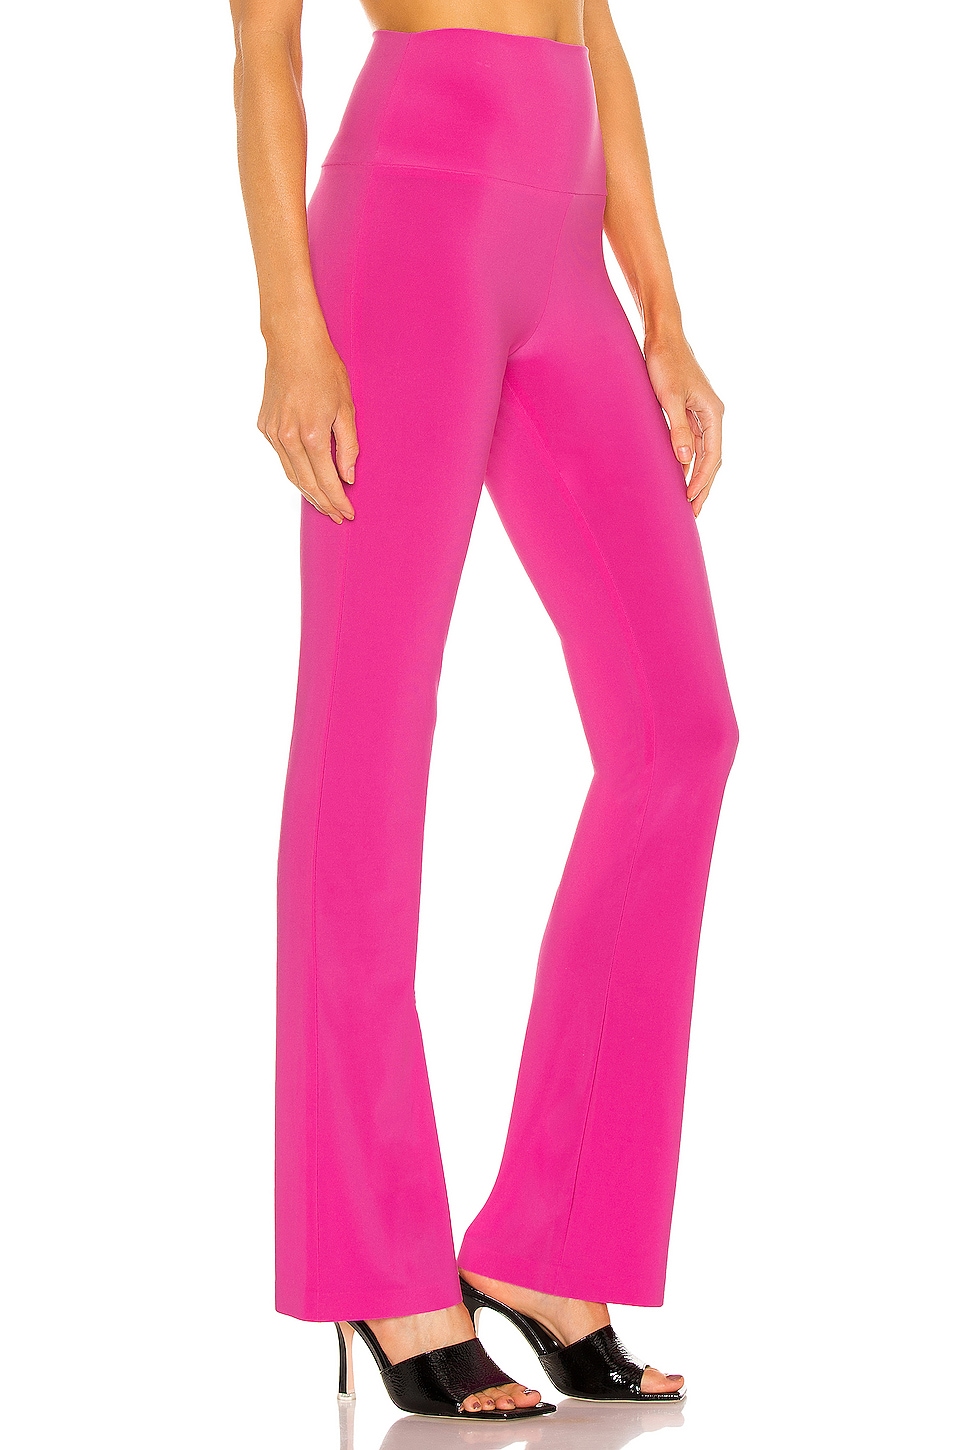 Norma Kamali x REVOLVE Boot Pant in Orchid Pink | REVOLVE